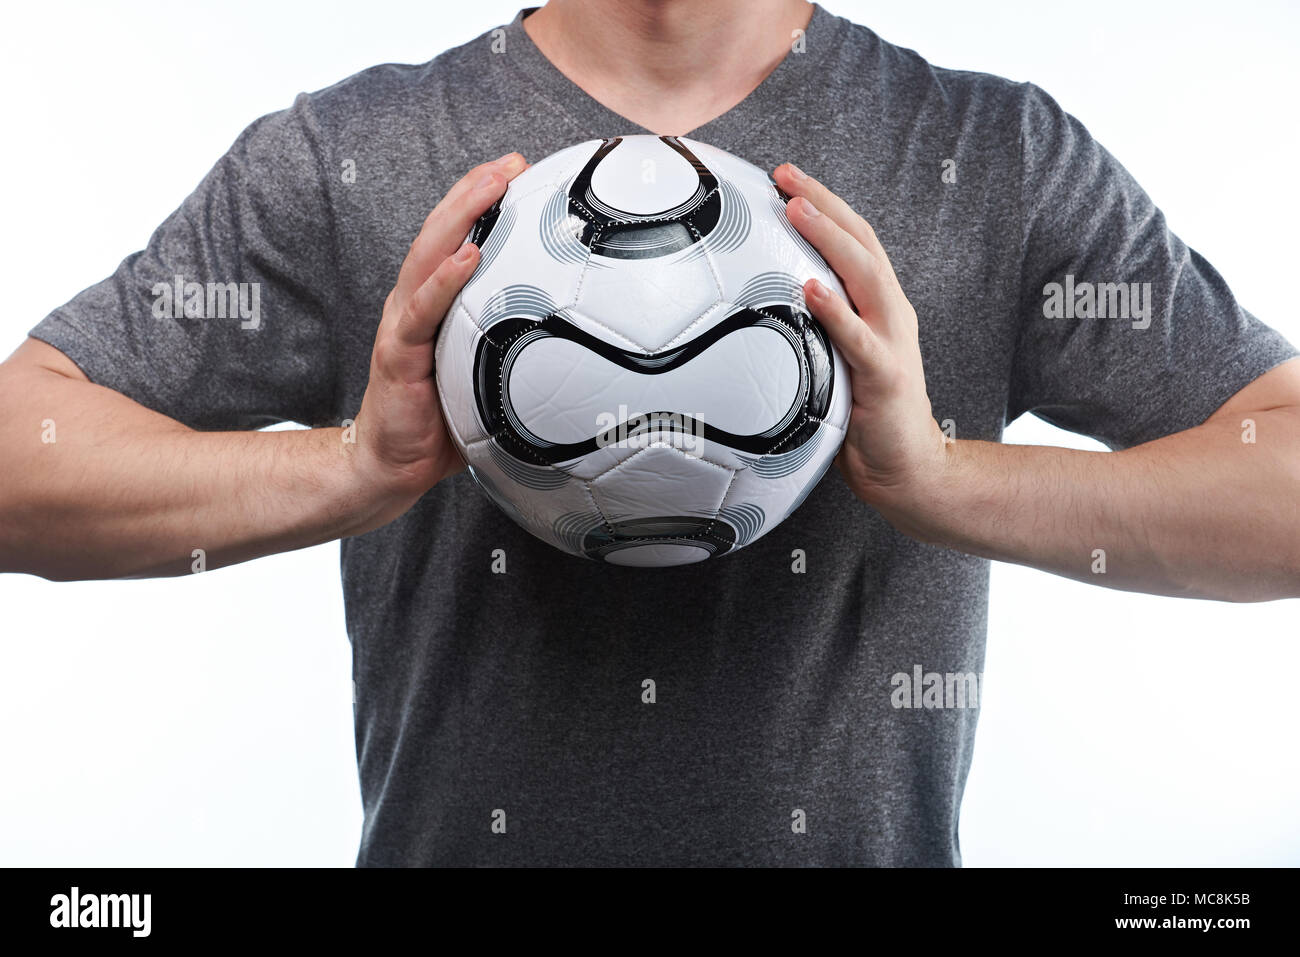 Man catch football ball with both hands on gray uniform background Stock Photo